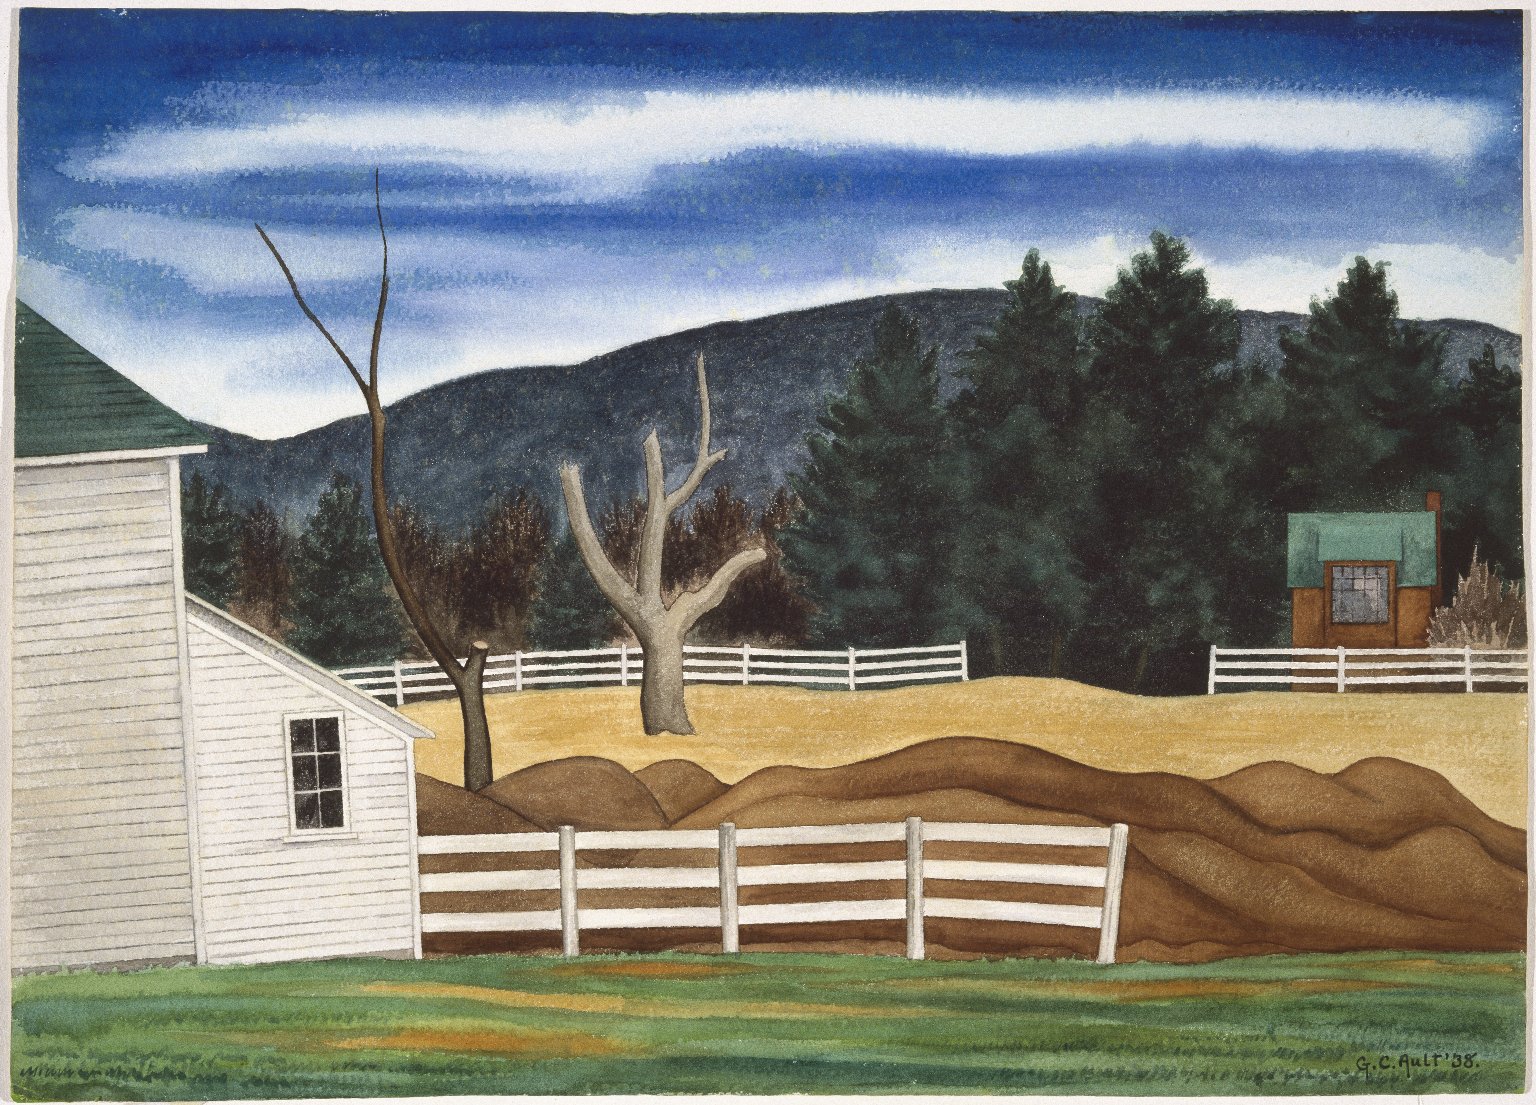 George Copeland Ault (American, 1891-1948). Woodstock Landscape, 1938. Watercolor over graphite on cream-colored, very thick, rough textured wove paper